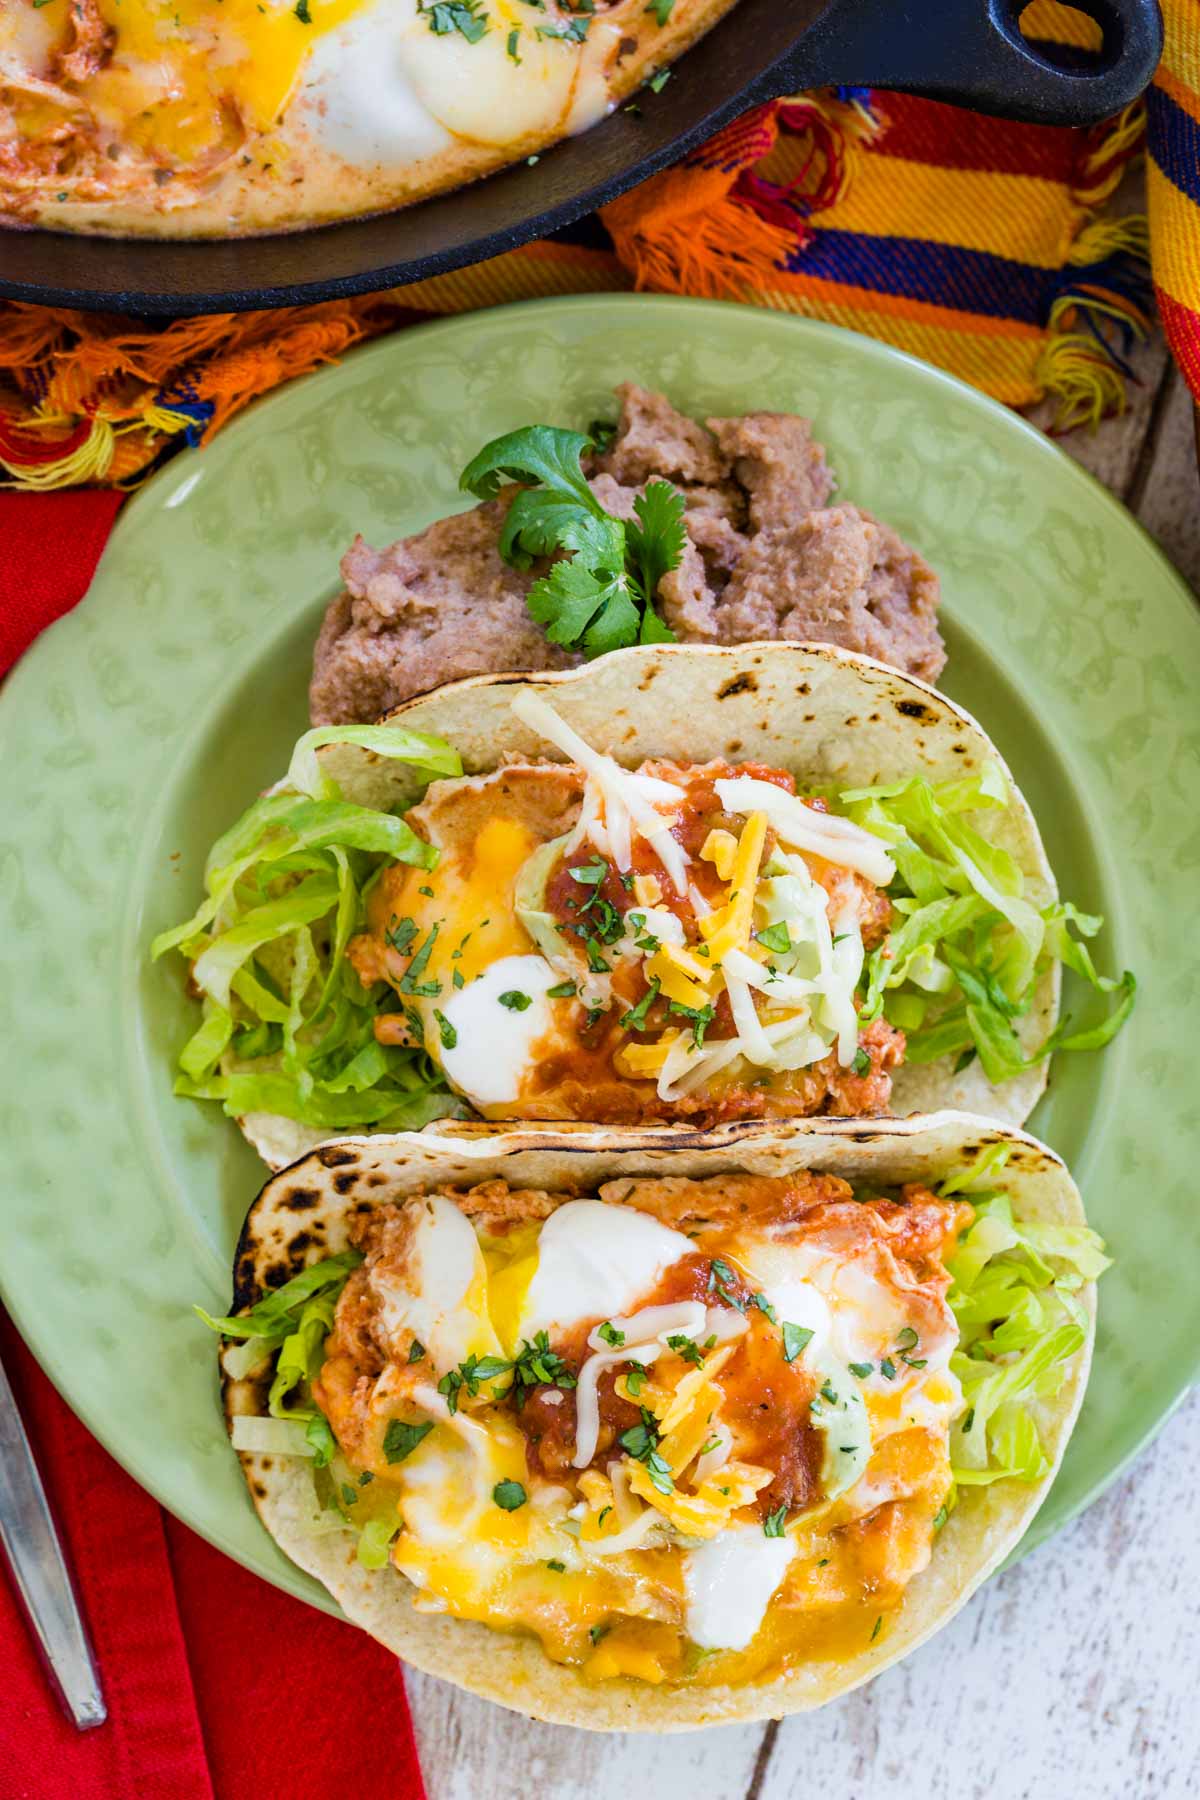 Two Salsa Egg Tacos with lettuce and shredded cheese next to a dollop of refried beans.